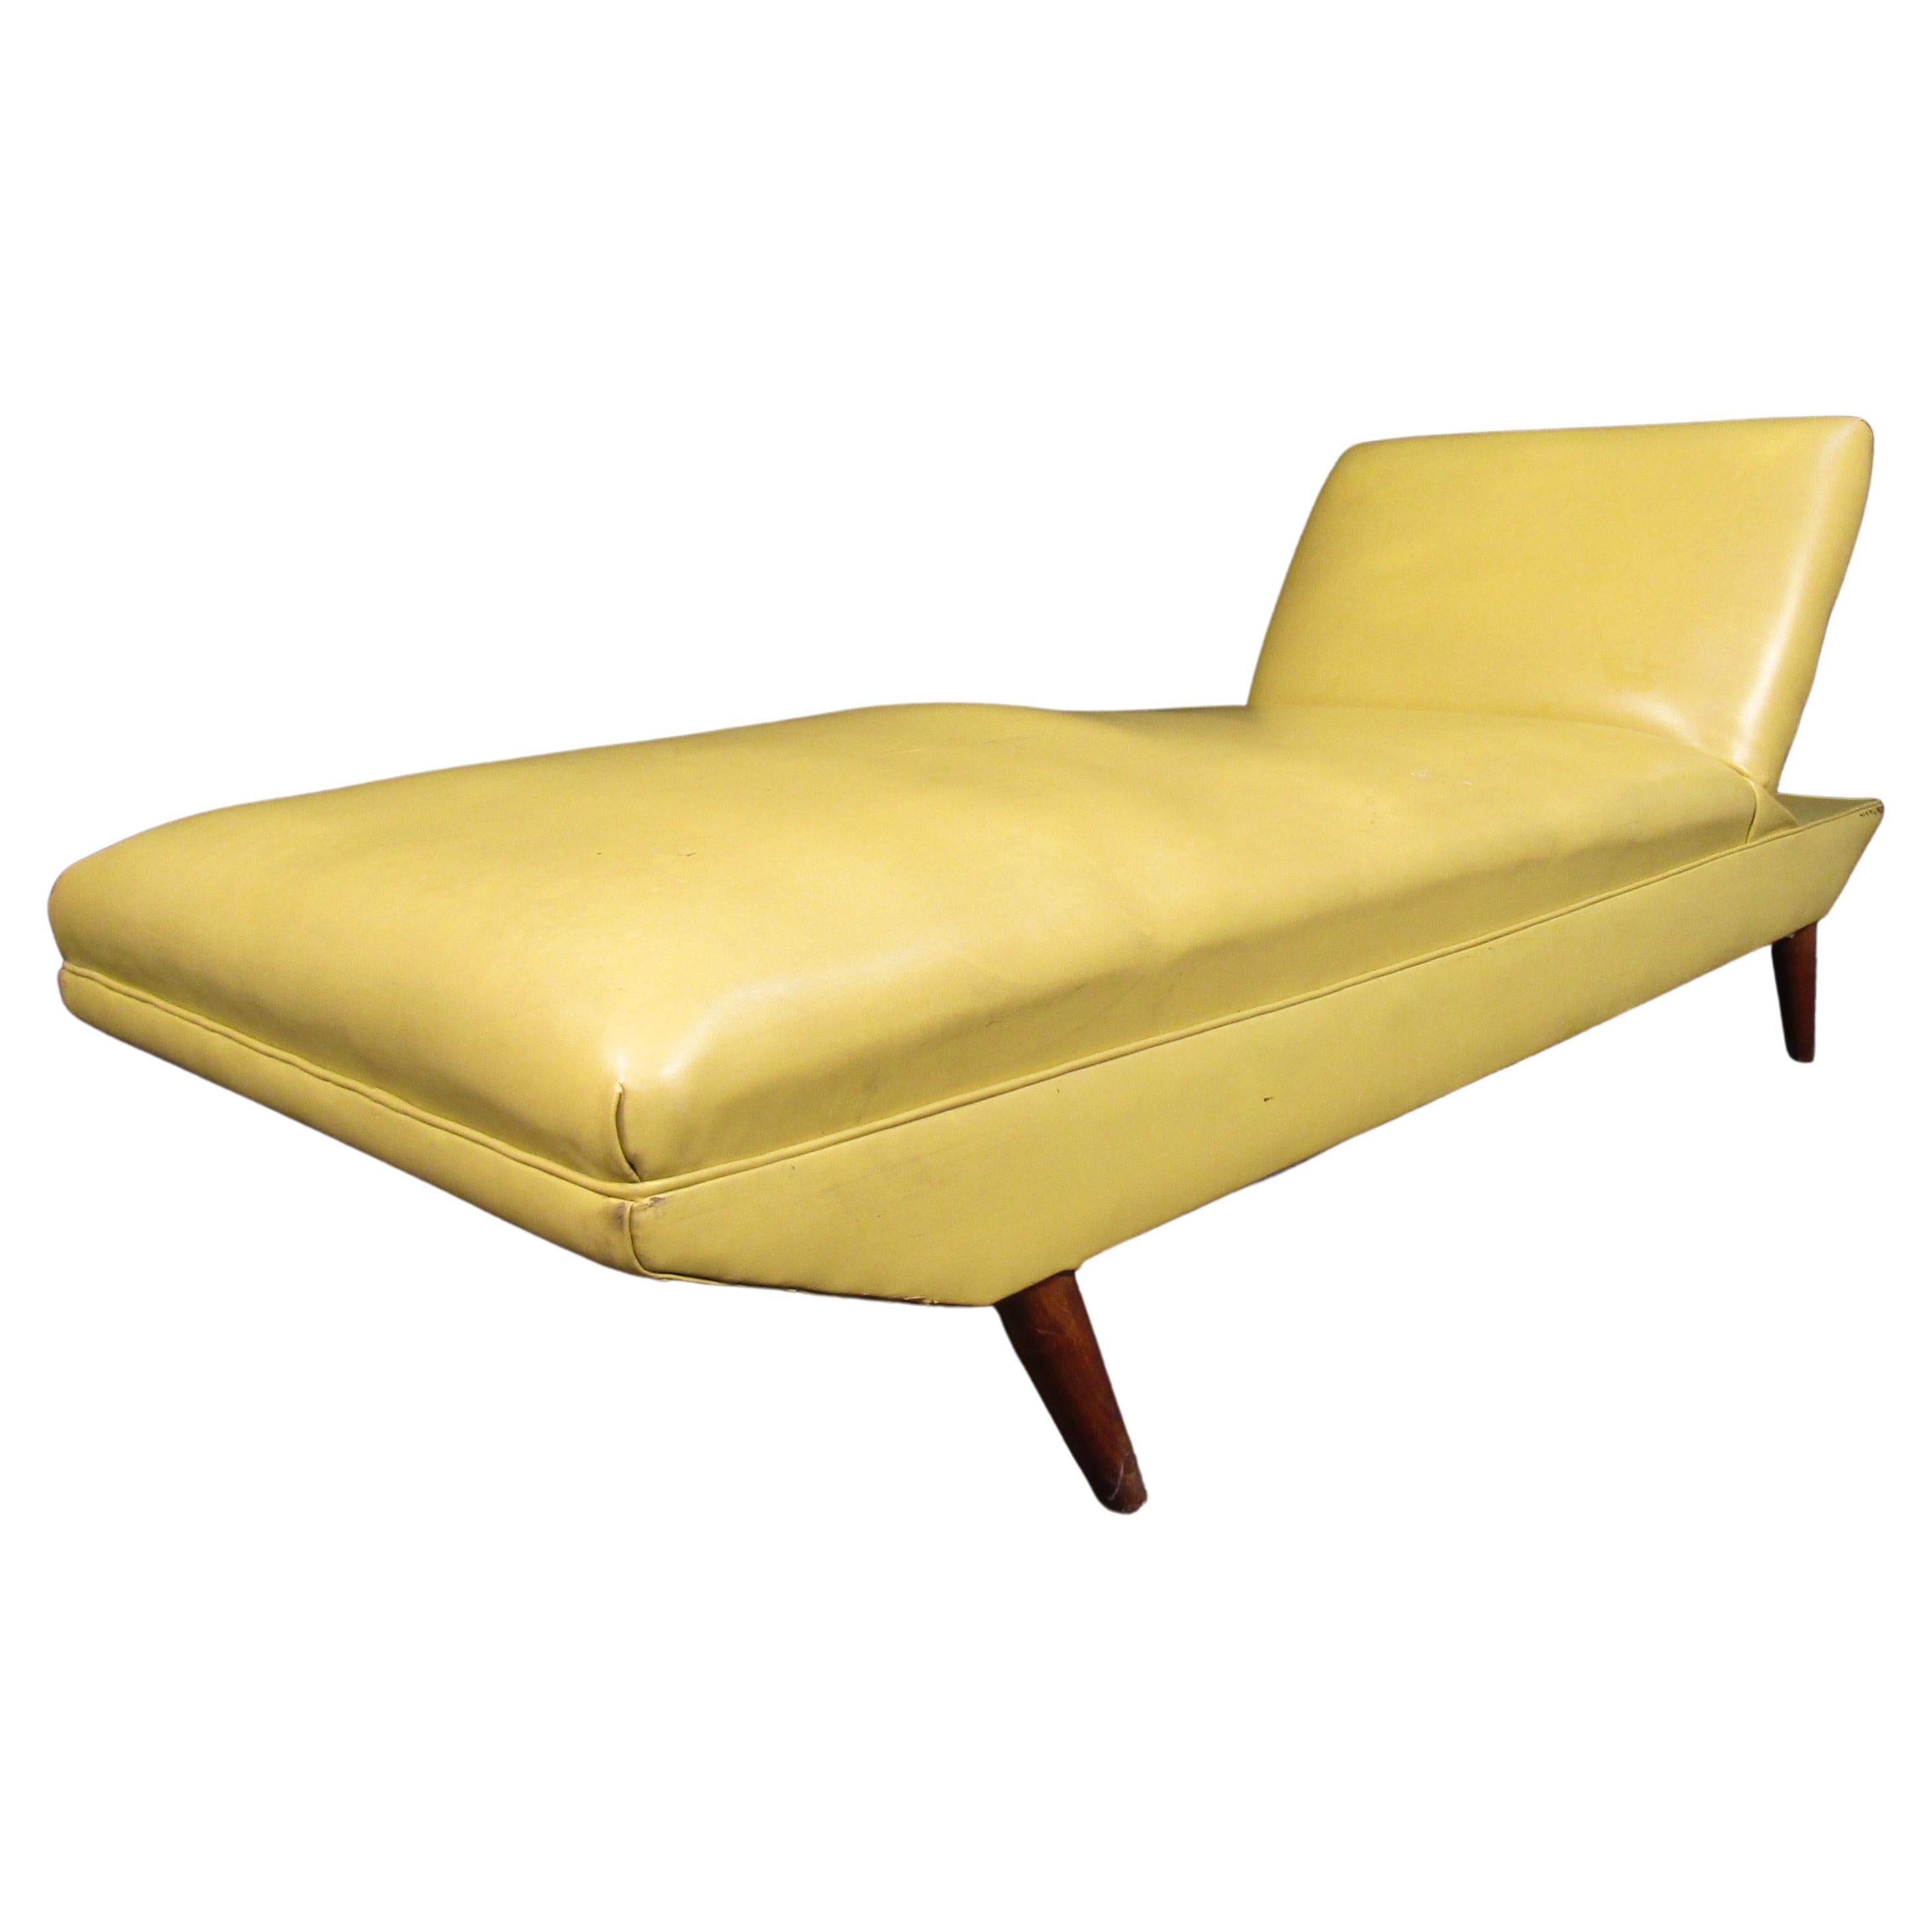 Vinyl and Walnut Mid-Century Modern Chaise Lounge For Sale